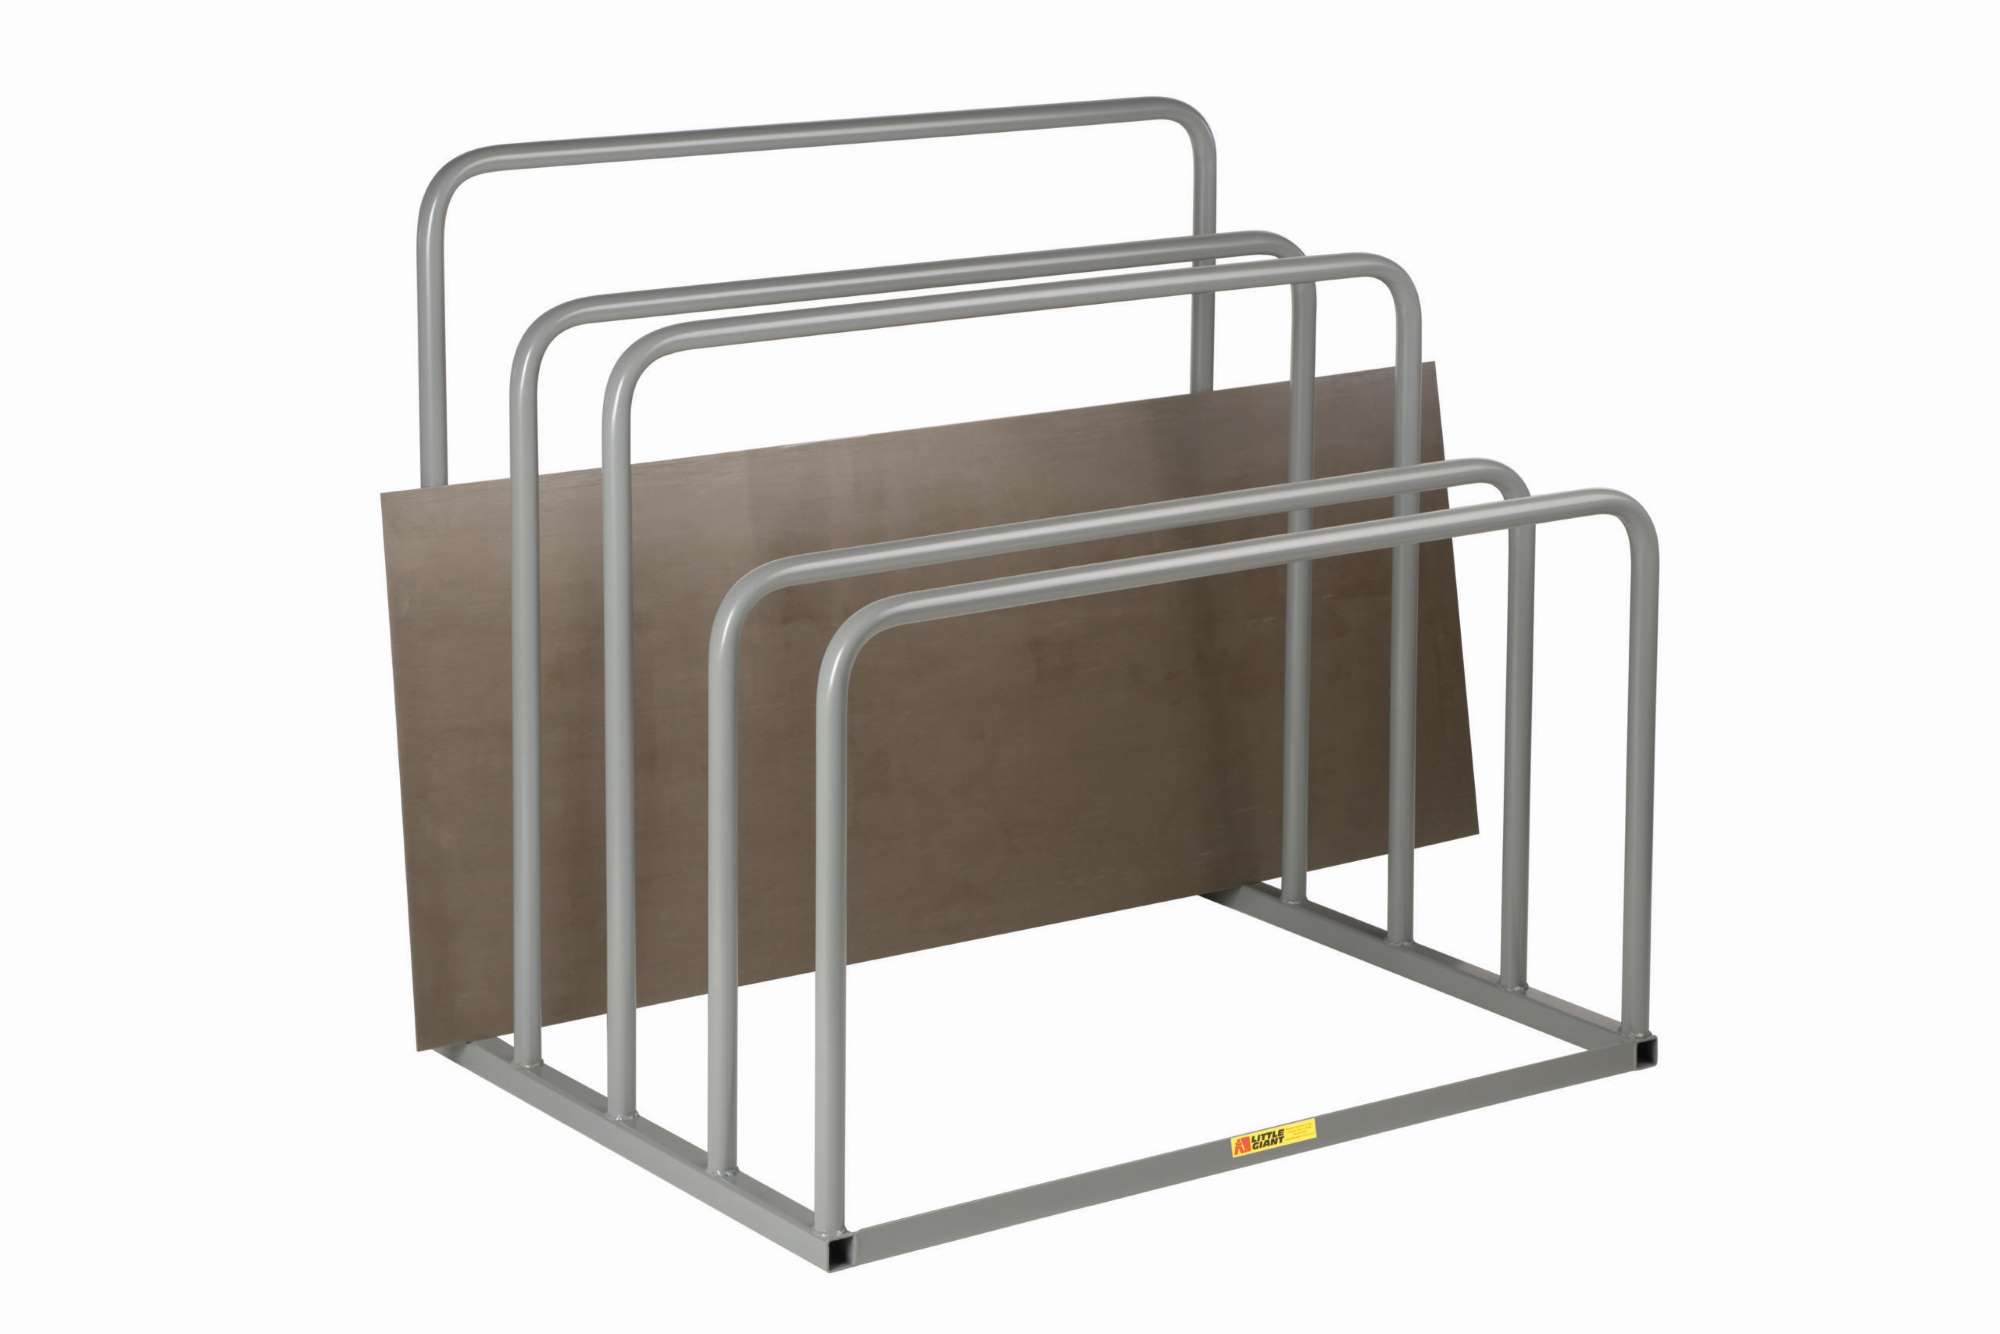 Little Giant, Vertical sheet rack, 1500 lbs capacity, four 7"W bays, Upright dividers measure 27", 36", 42"H